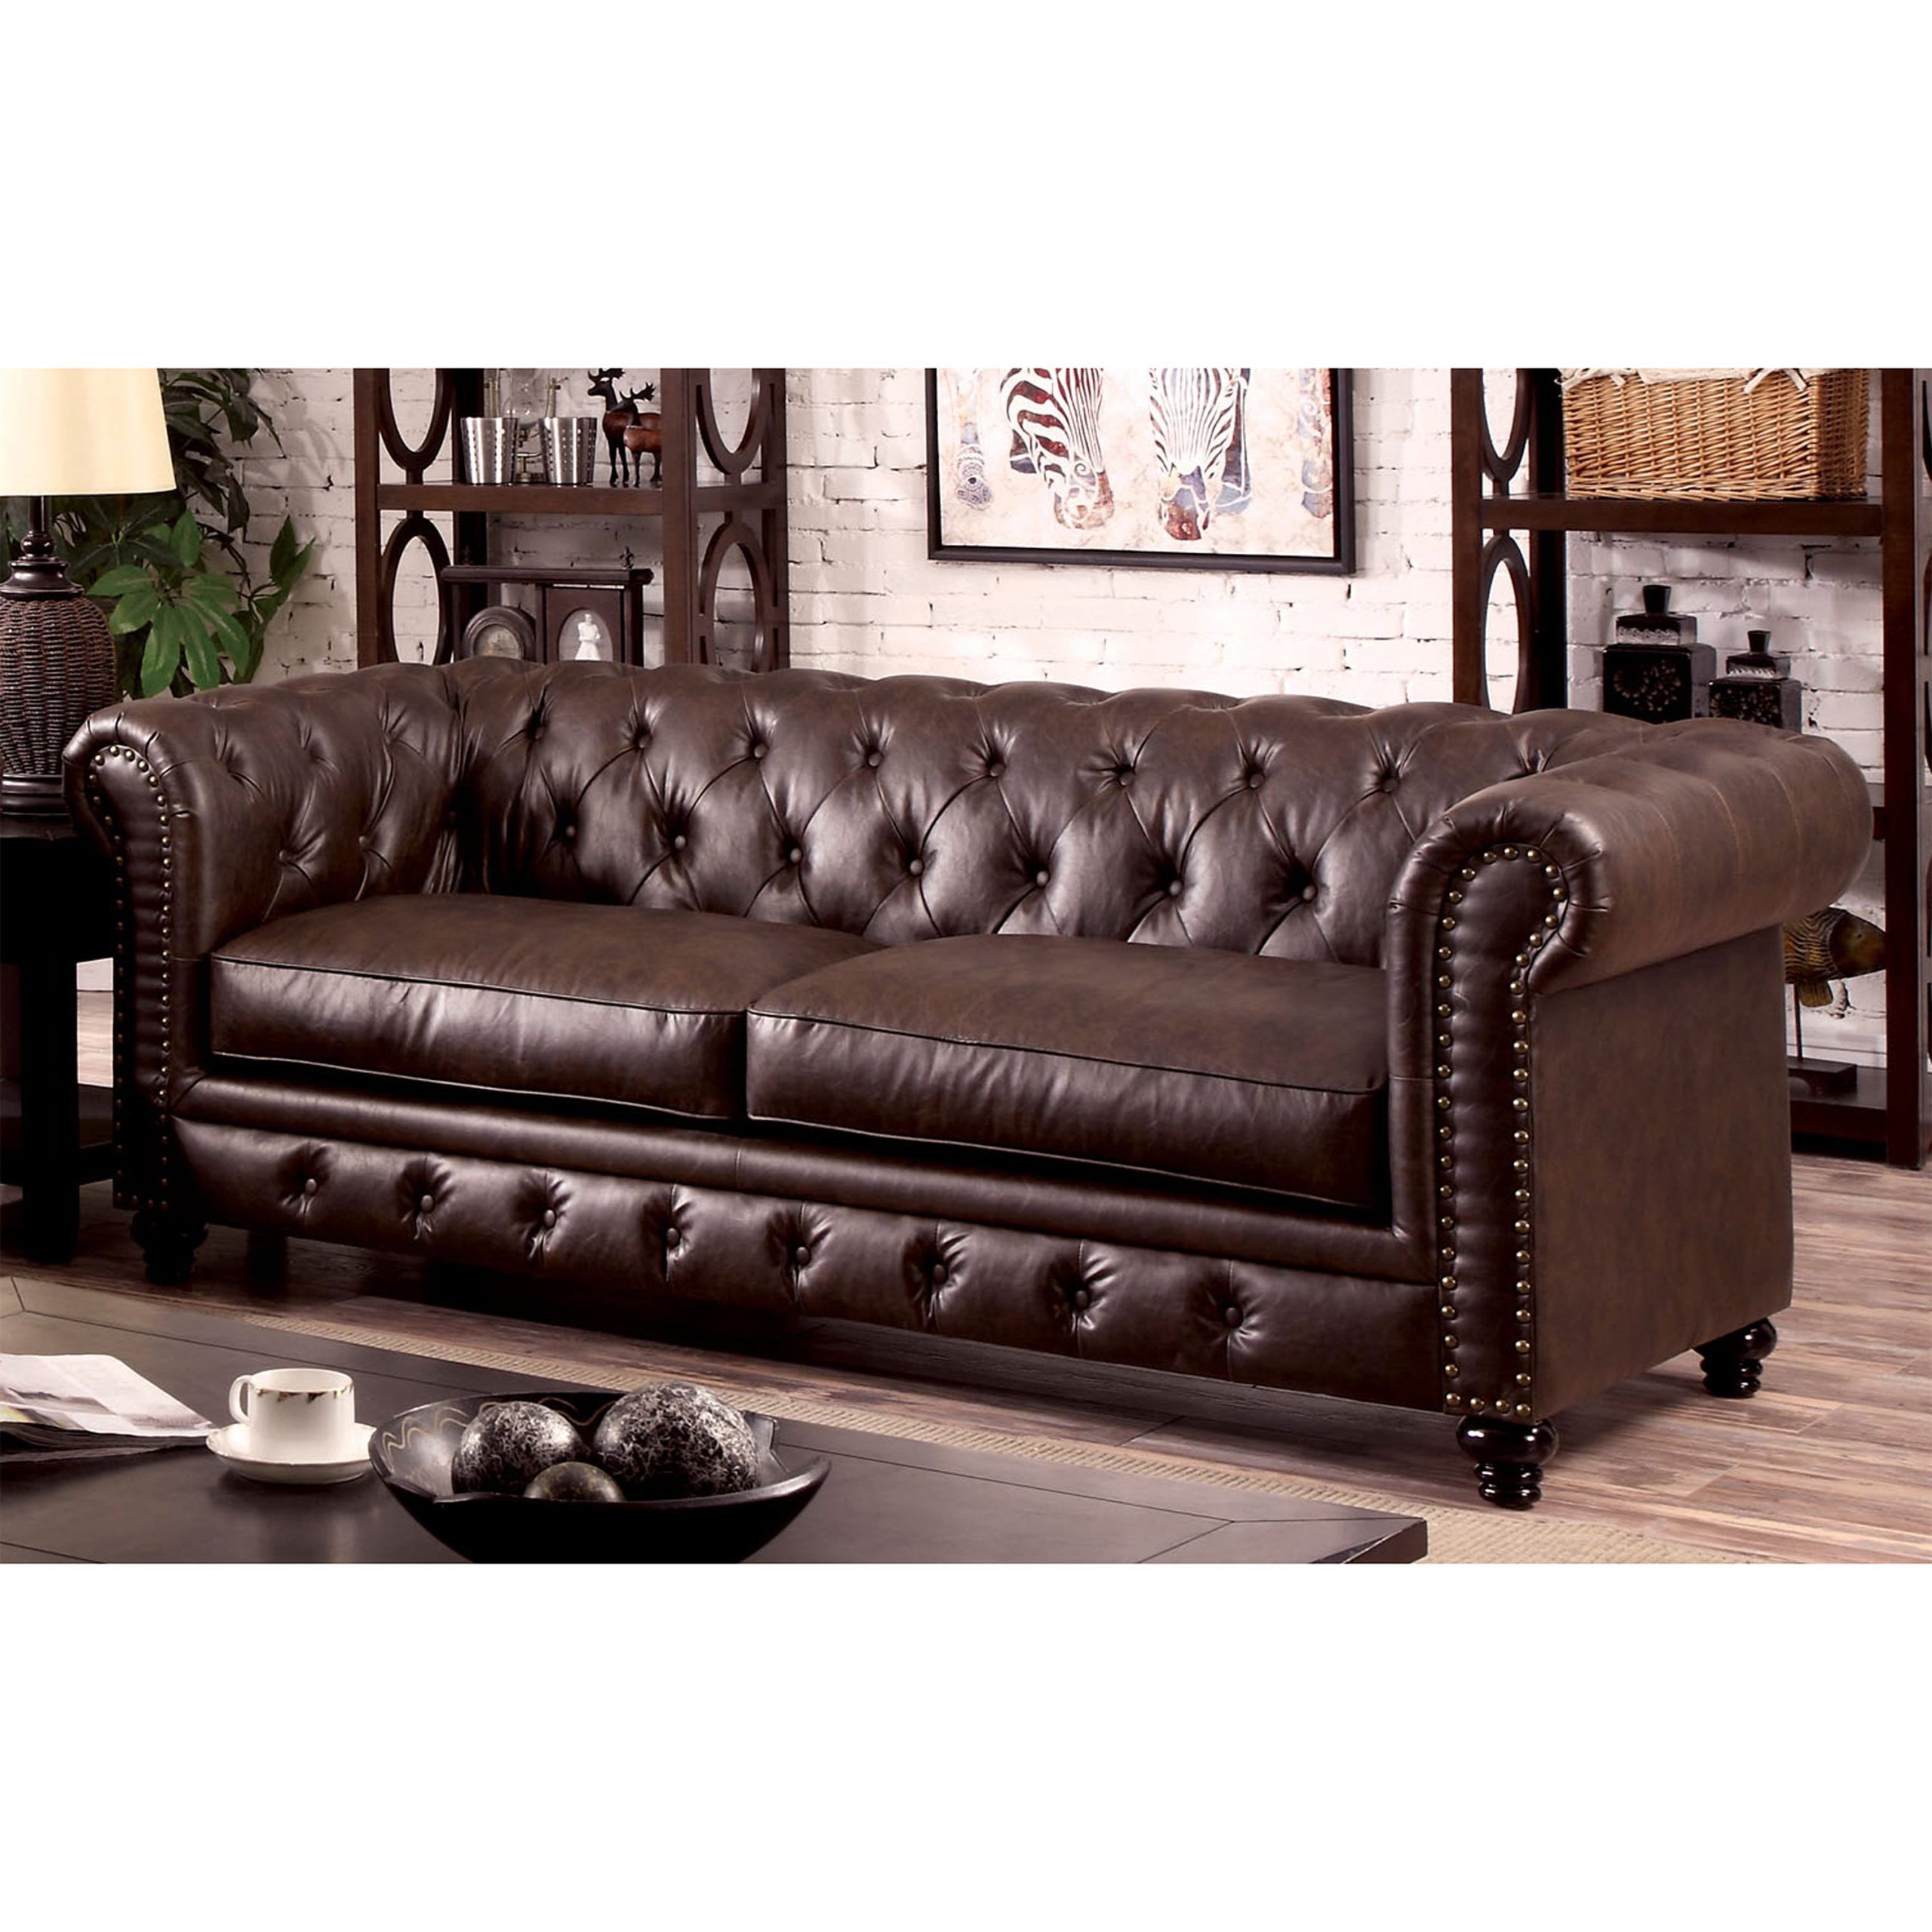 Furniture Of America Tufted Glam Faux Leather Nyssa Tuxedo Sofa, Brown For Faux Leather Sofas In Dark Brown (View 5 of 20)